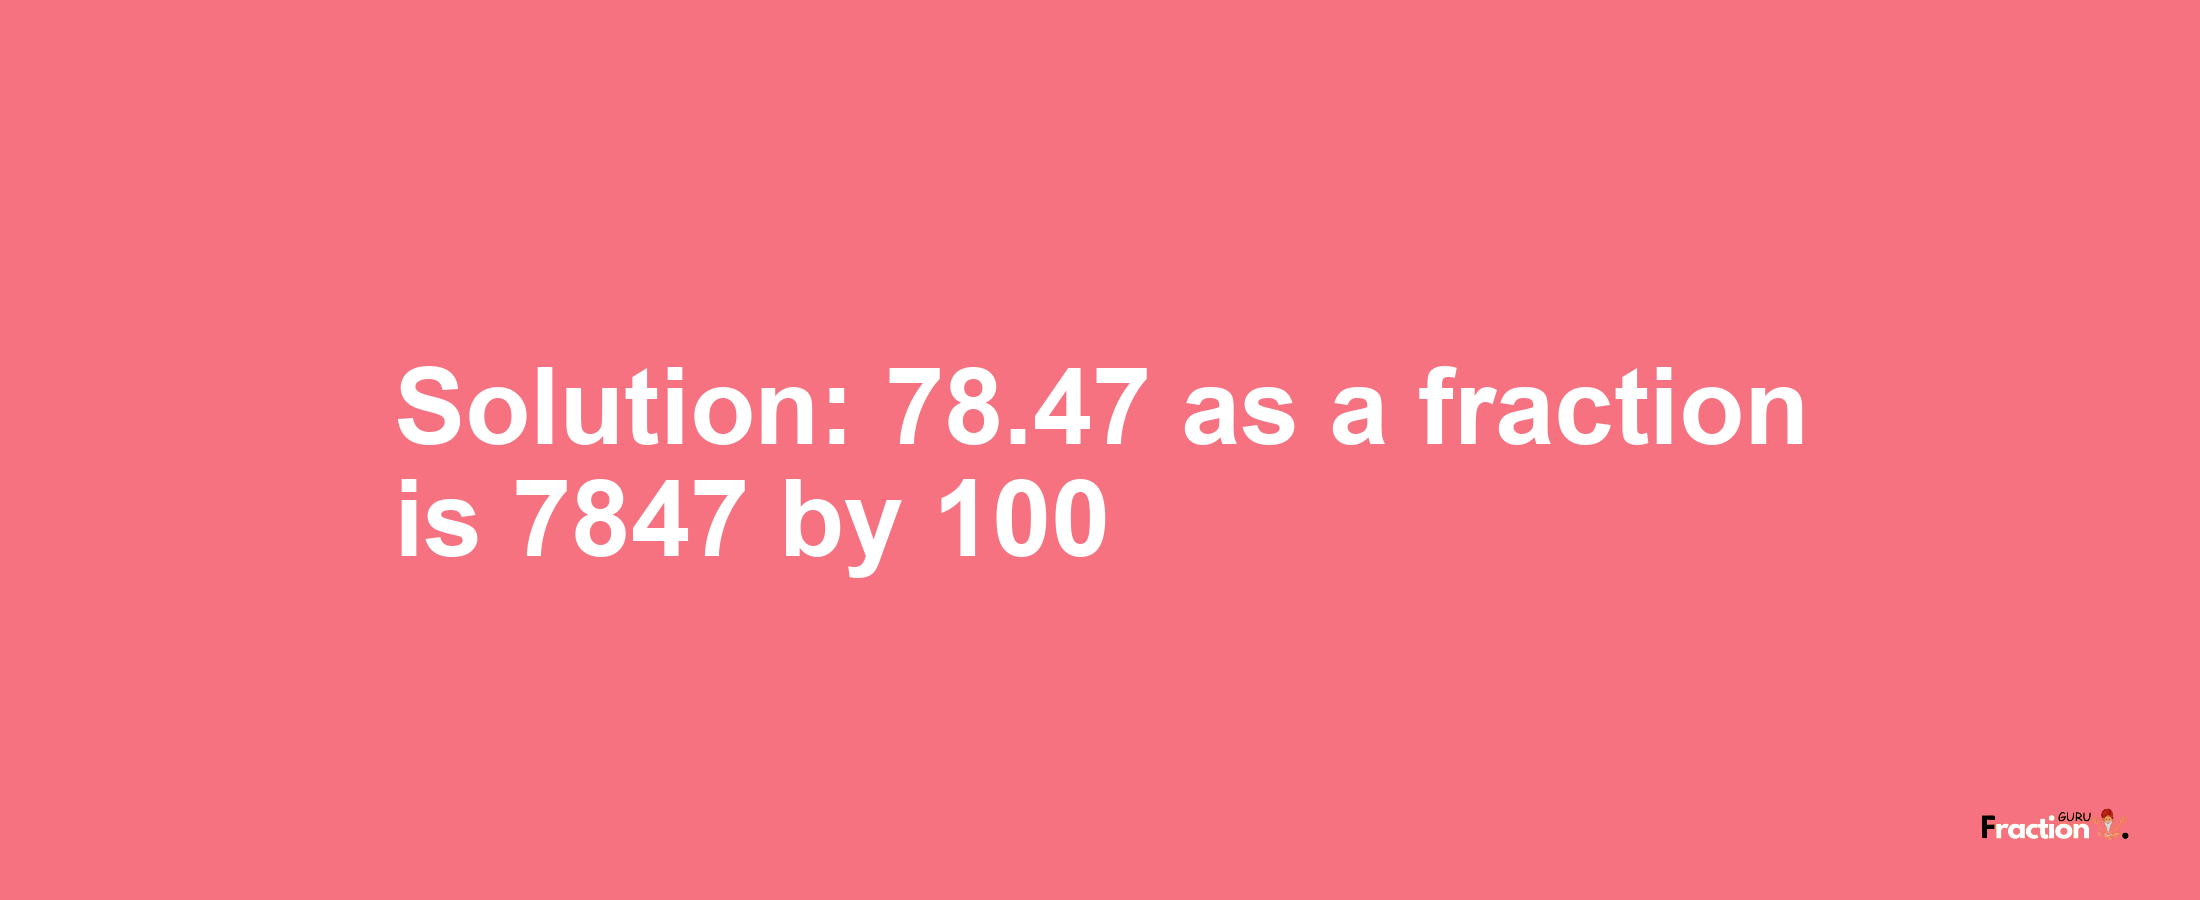 Solution:78.47 as a fraction is 7847/100